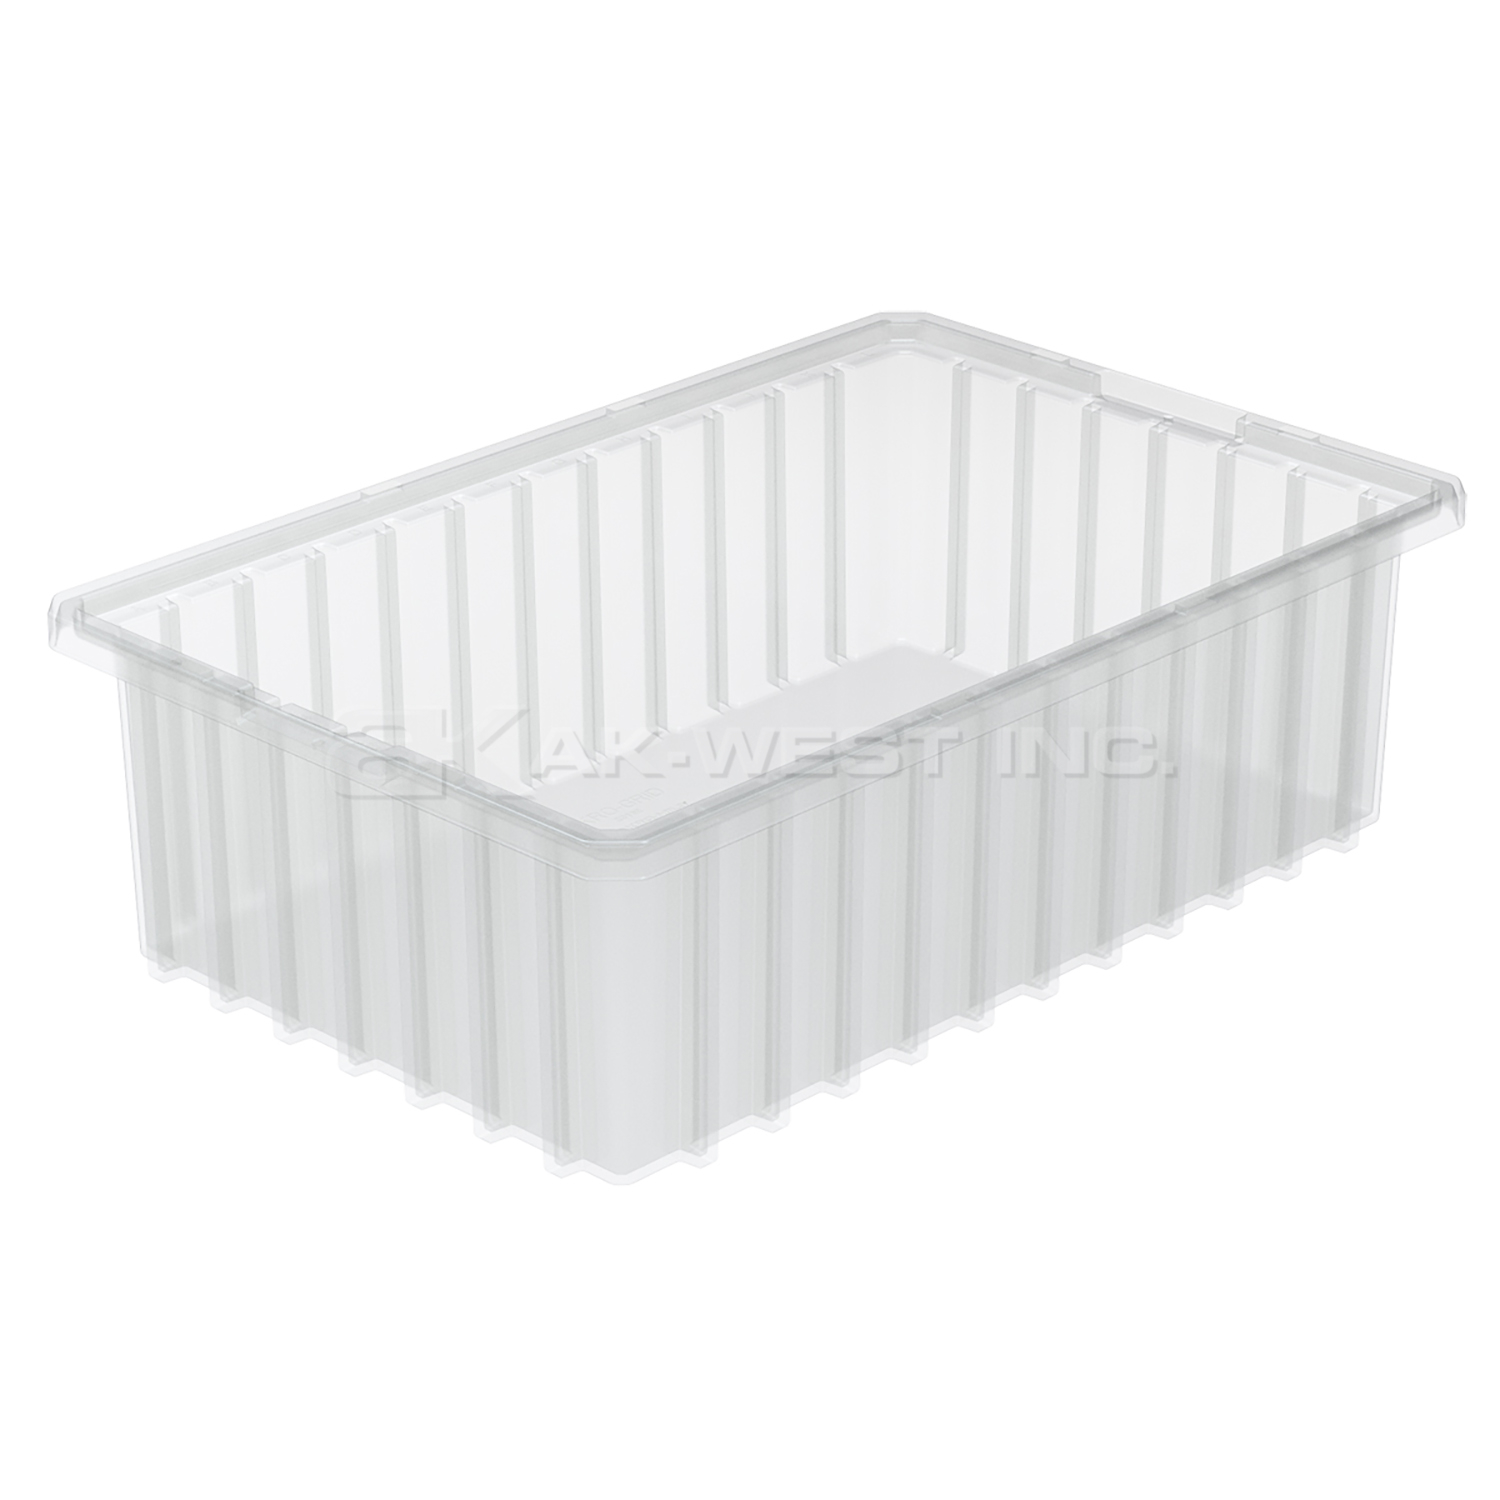 Clear, 16-1/2" x 10-7/8" x 5" Dividable Grid Container (12 Per Carton)